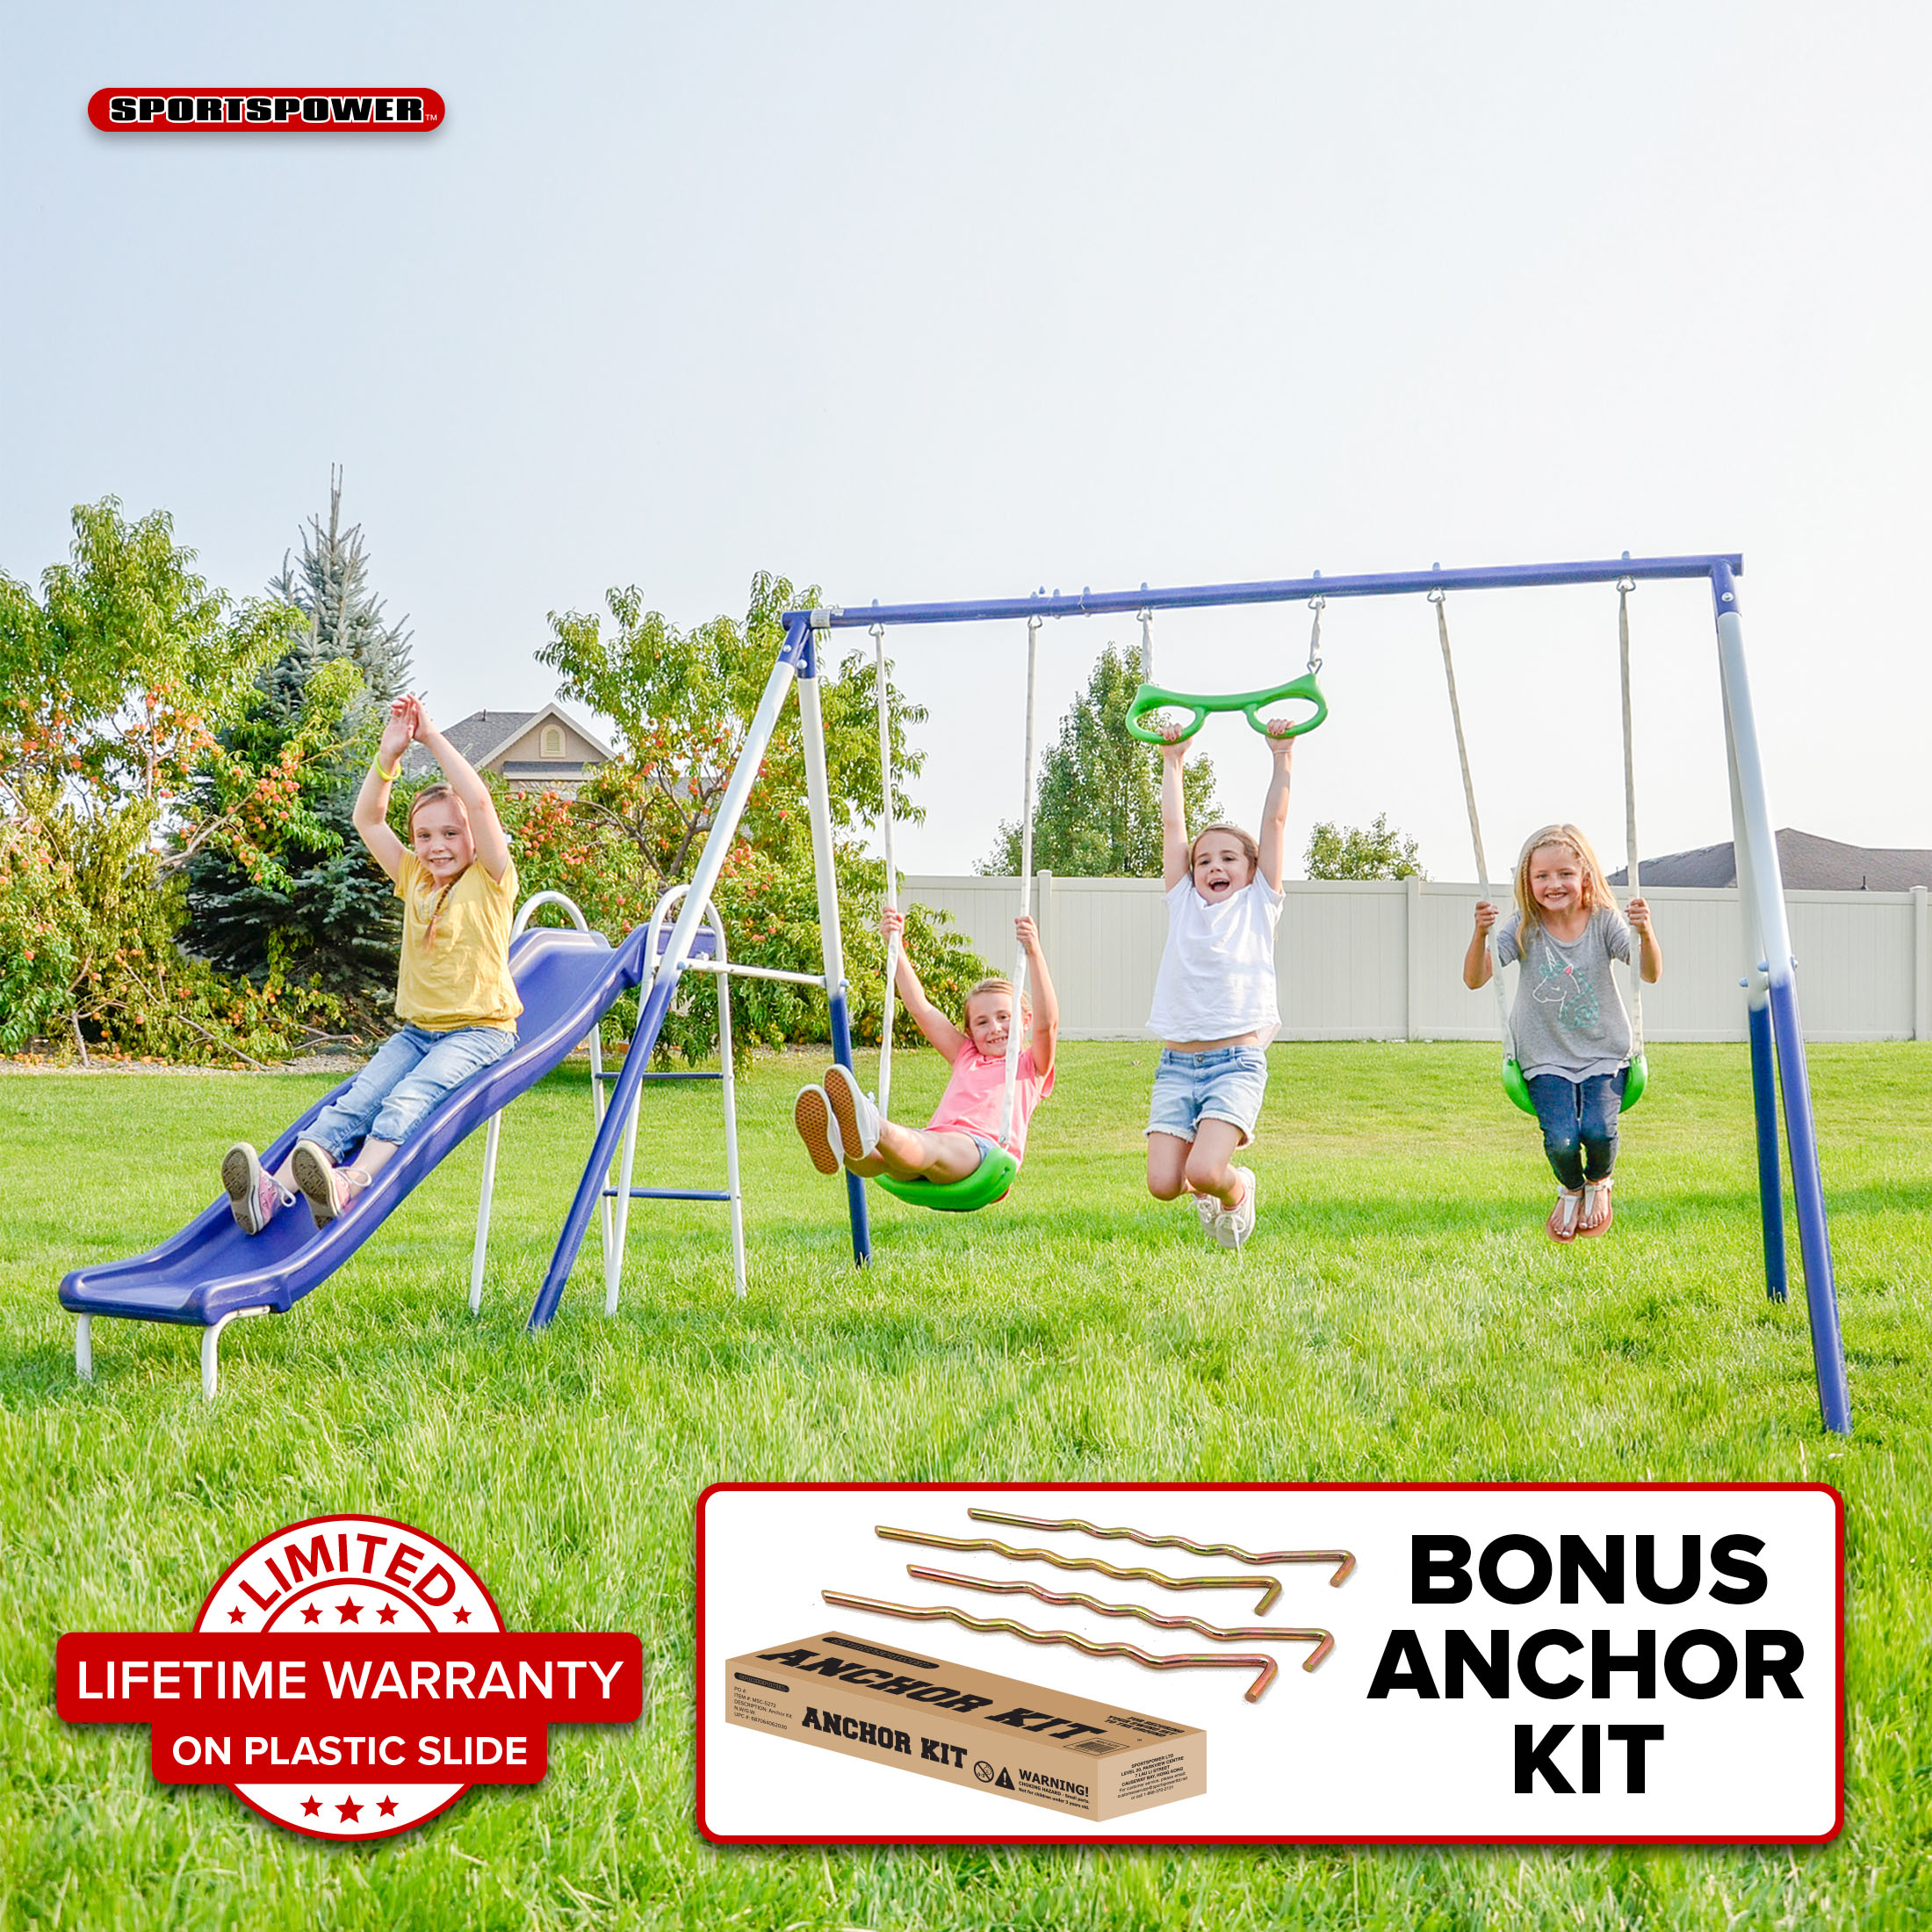 Sportspower Sierra Vista Outdoor Metal Swing Set with Trapeze, Lifetime Warranty on Blow Molded Slide, and Bonus Anchor Kit - image 1 of 12